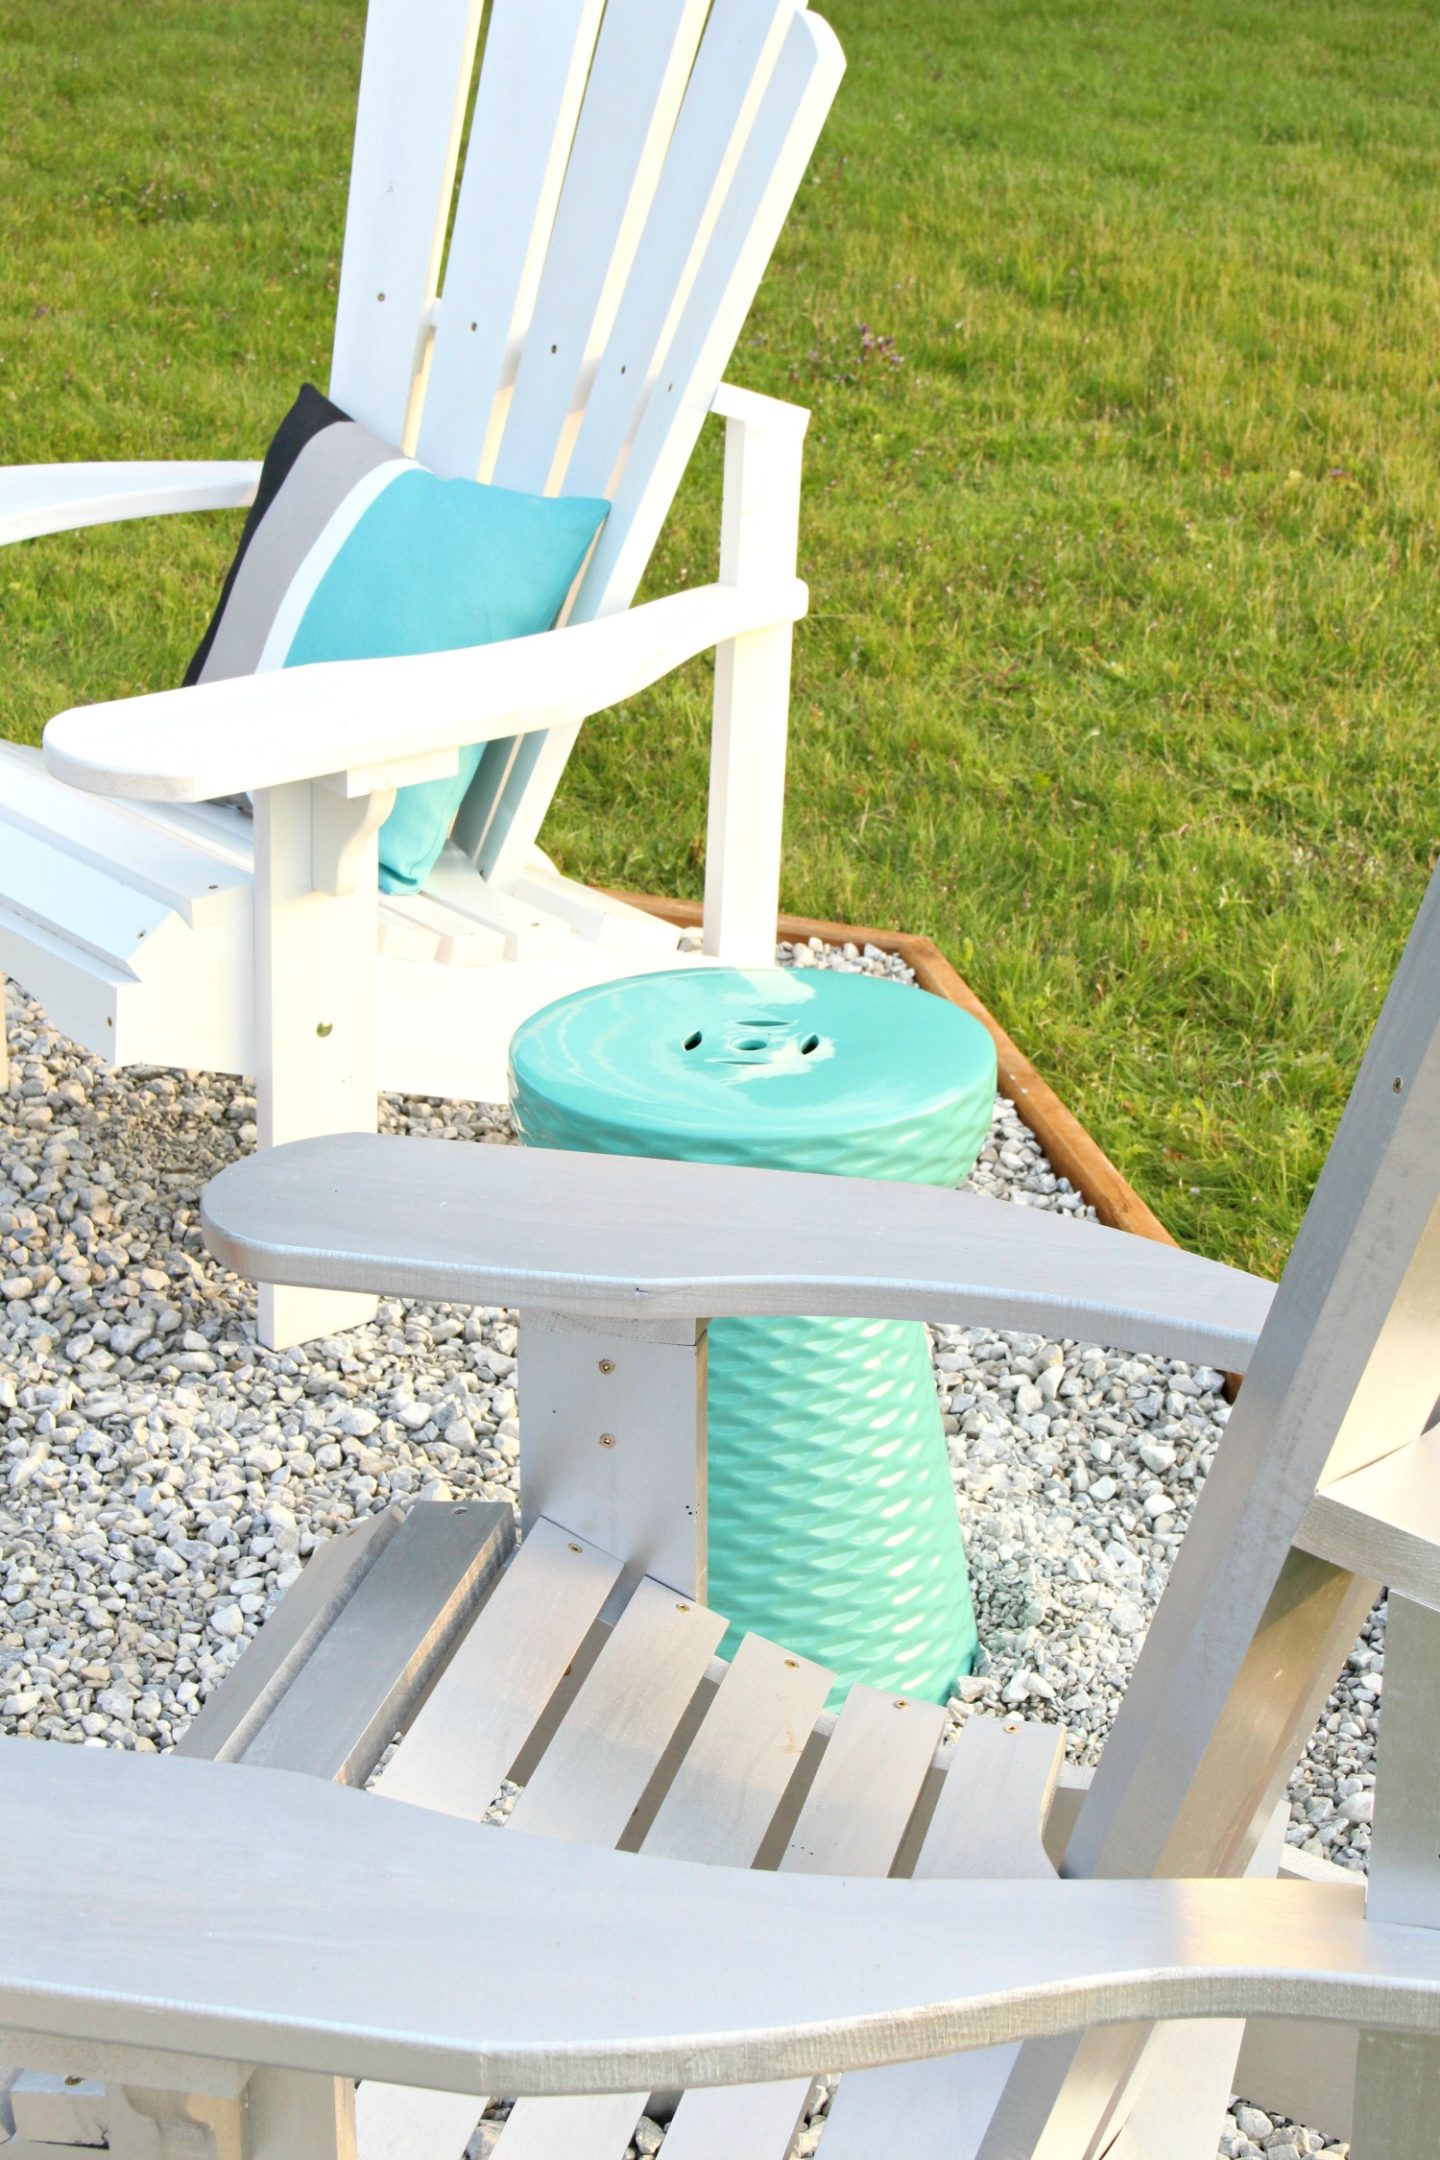 Beachy Fire Pit Makeover + DIY Ombre Adirondack Chairs (Sponsored by The Home Depot Canada)